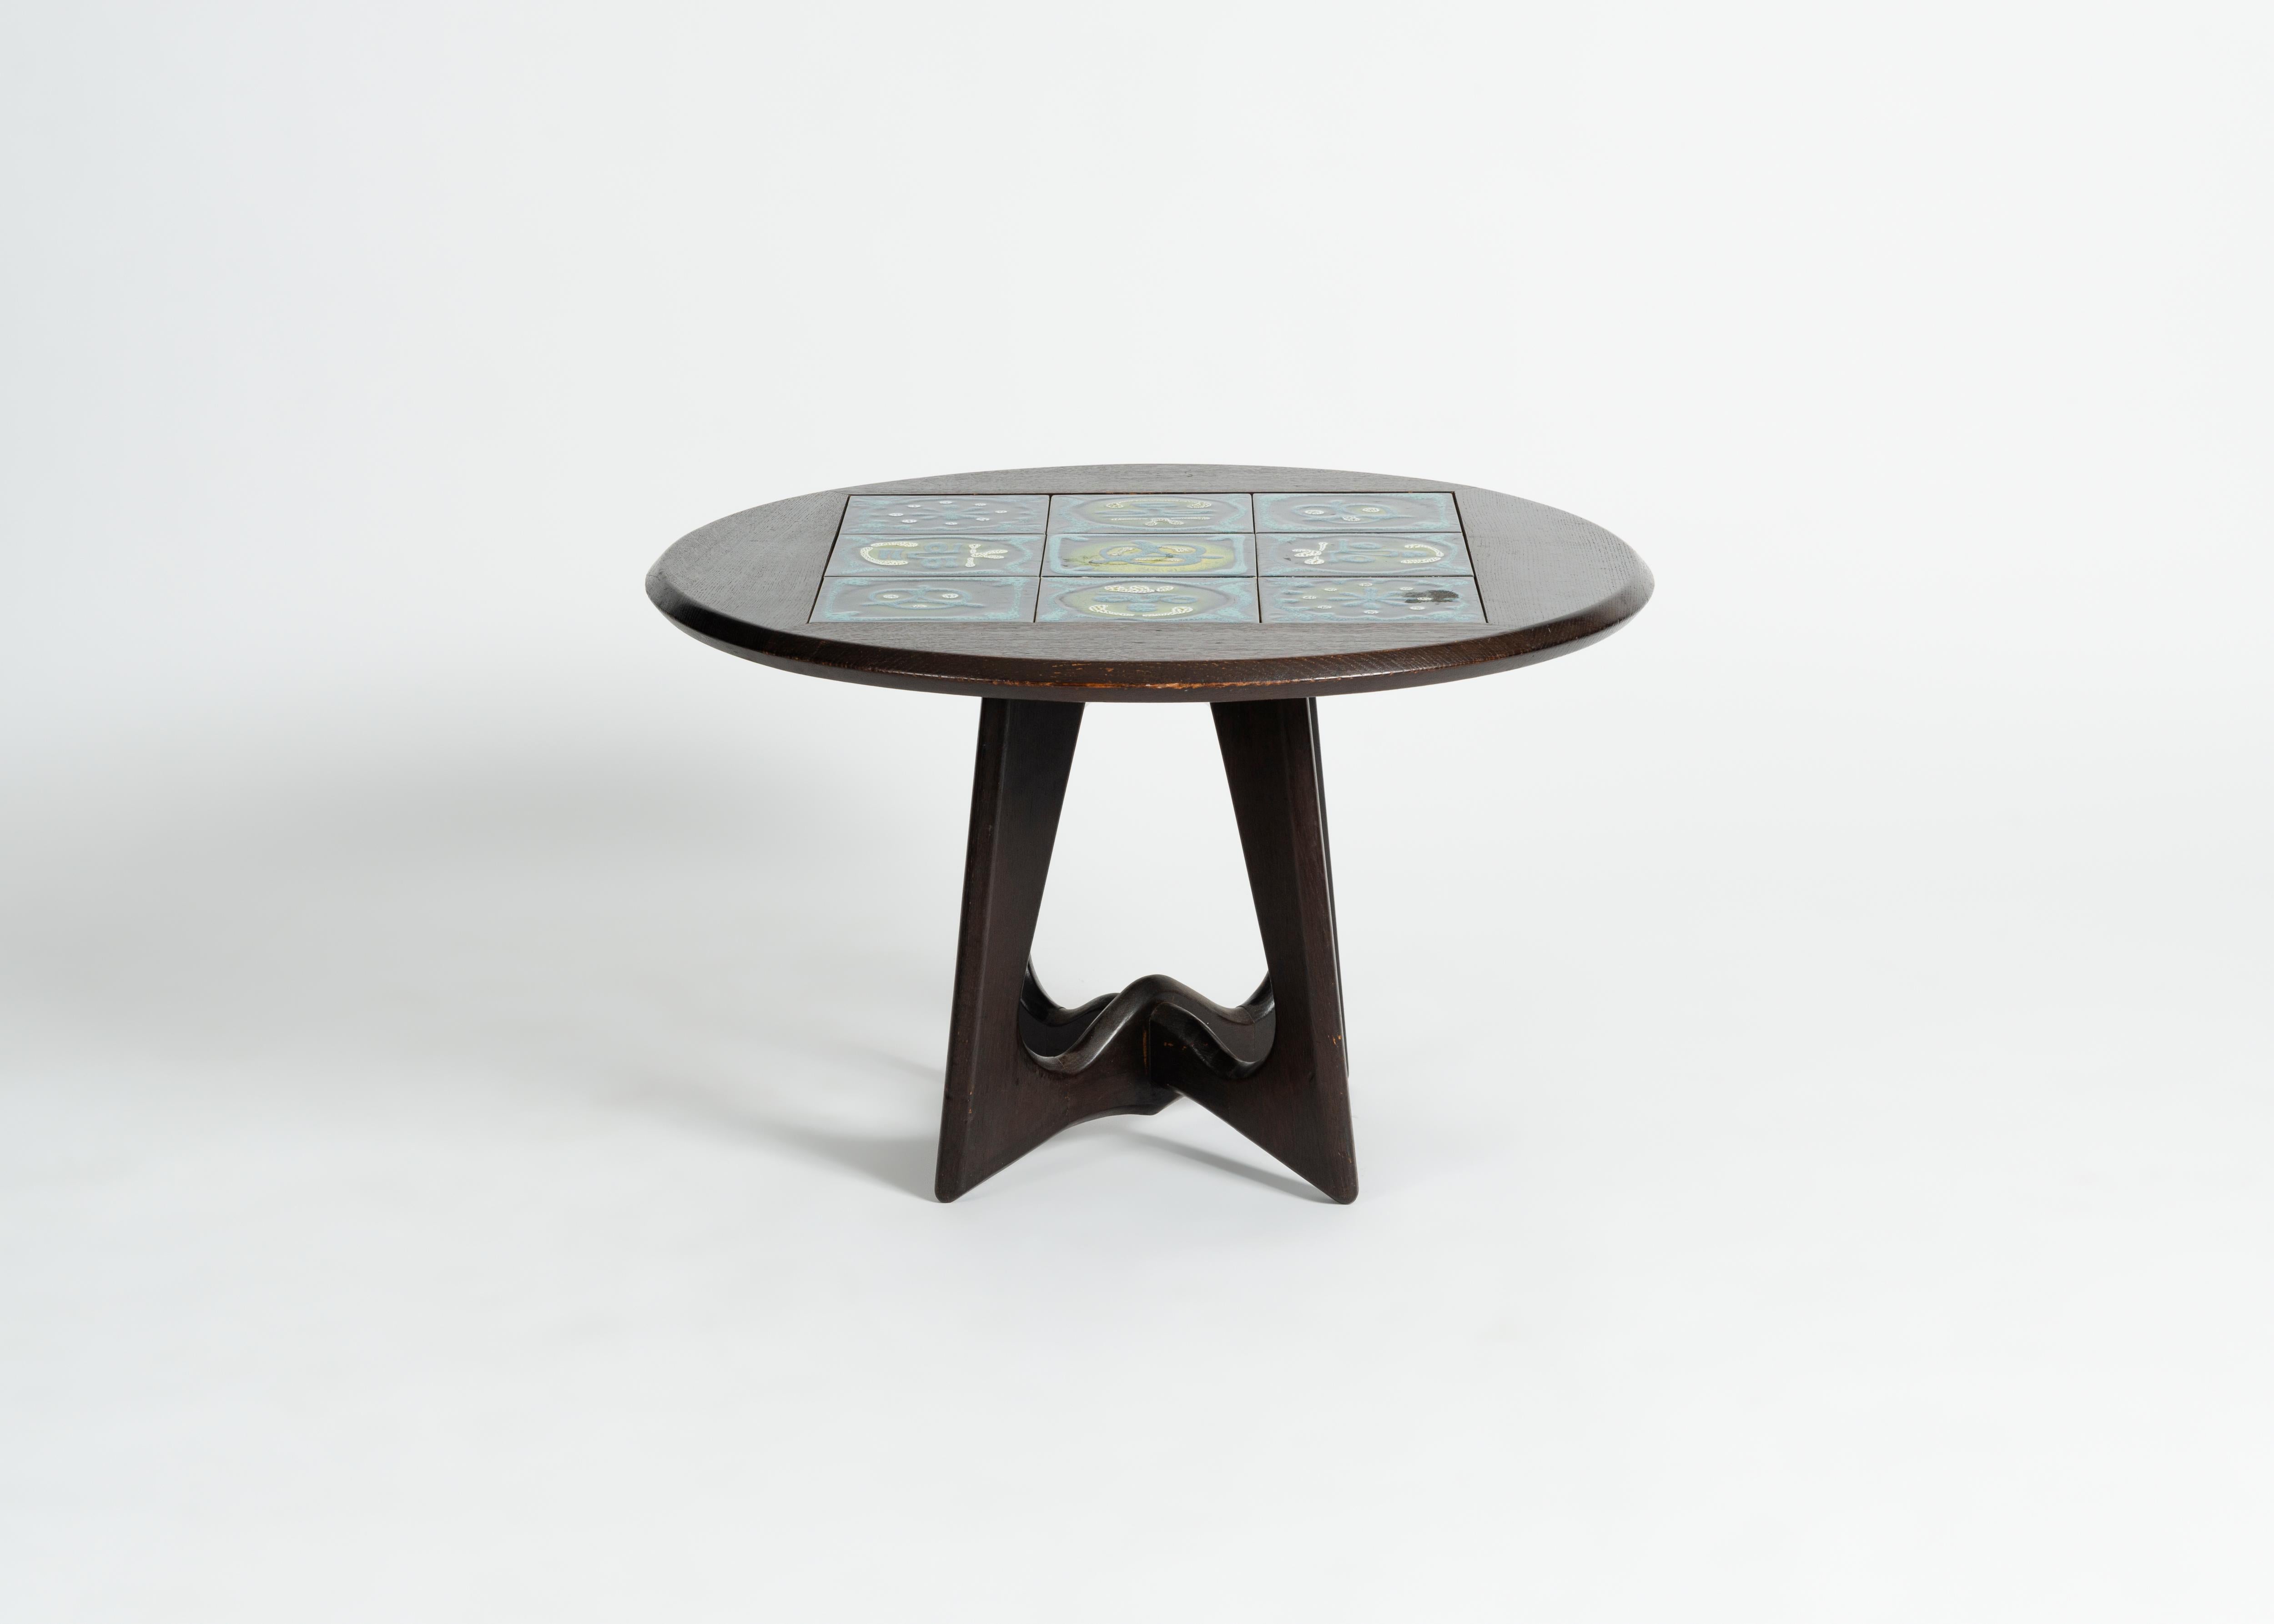 Coffee table with ceramic tiles by French midcentury designers Robert Guillerme and Jacques Chambron.